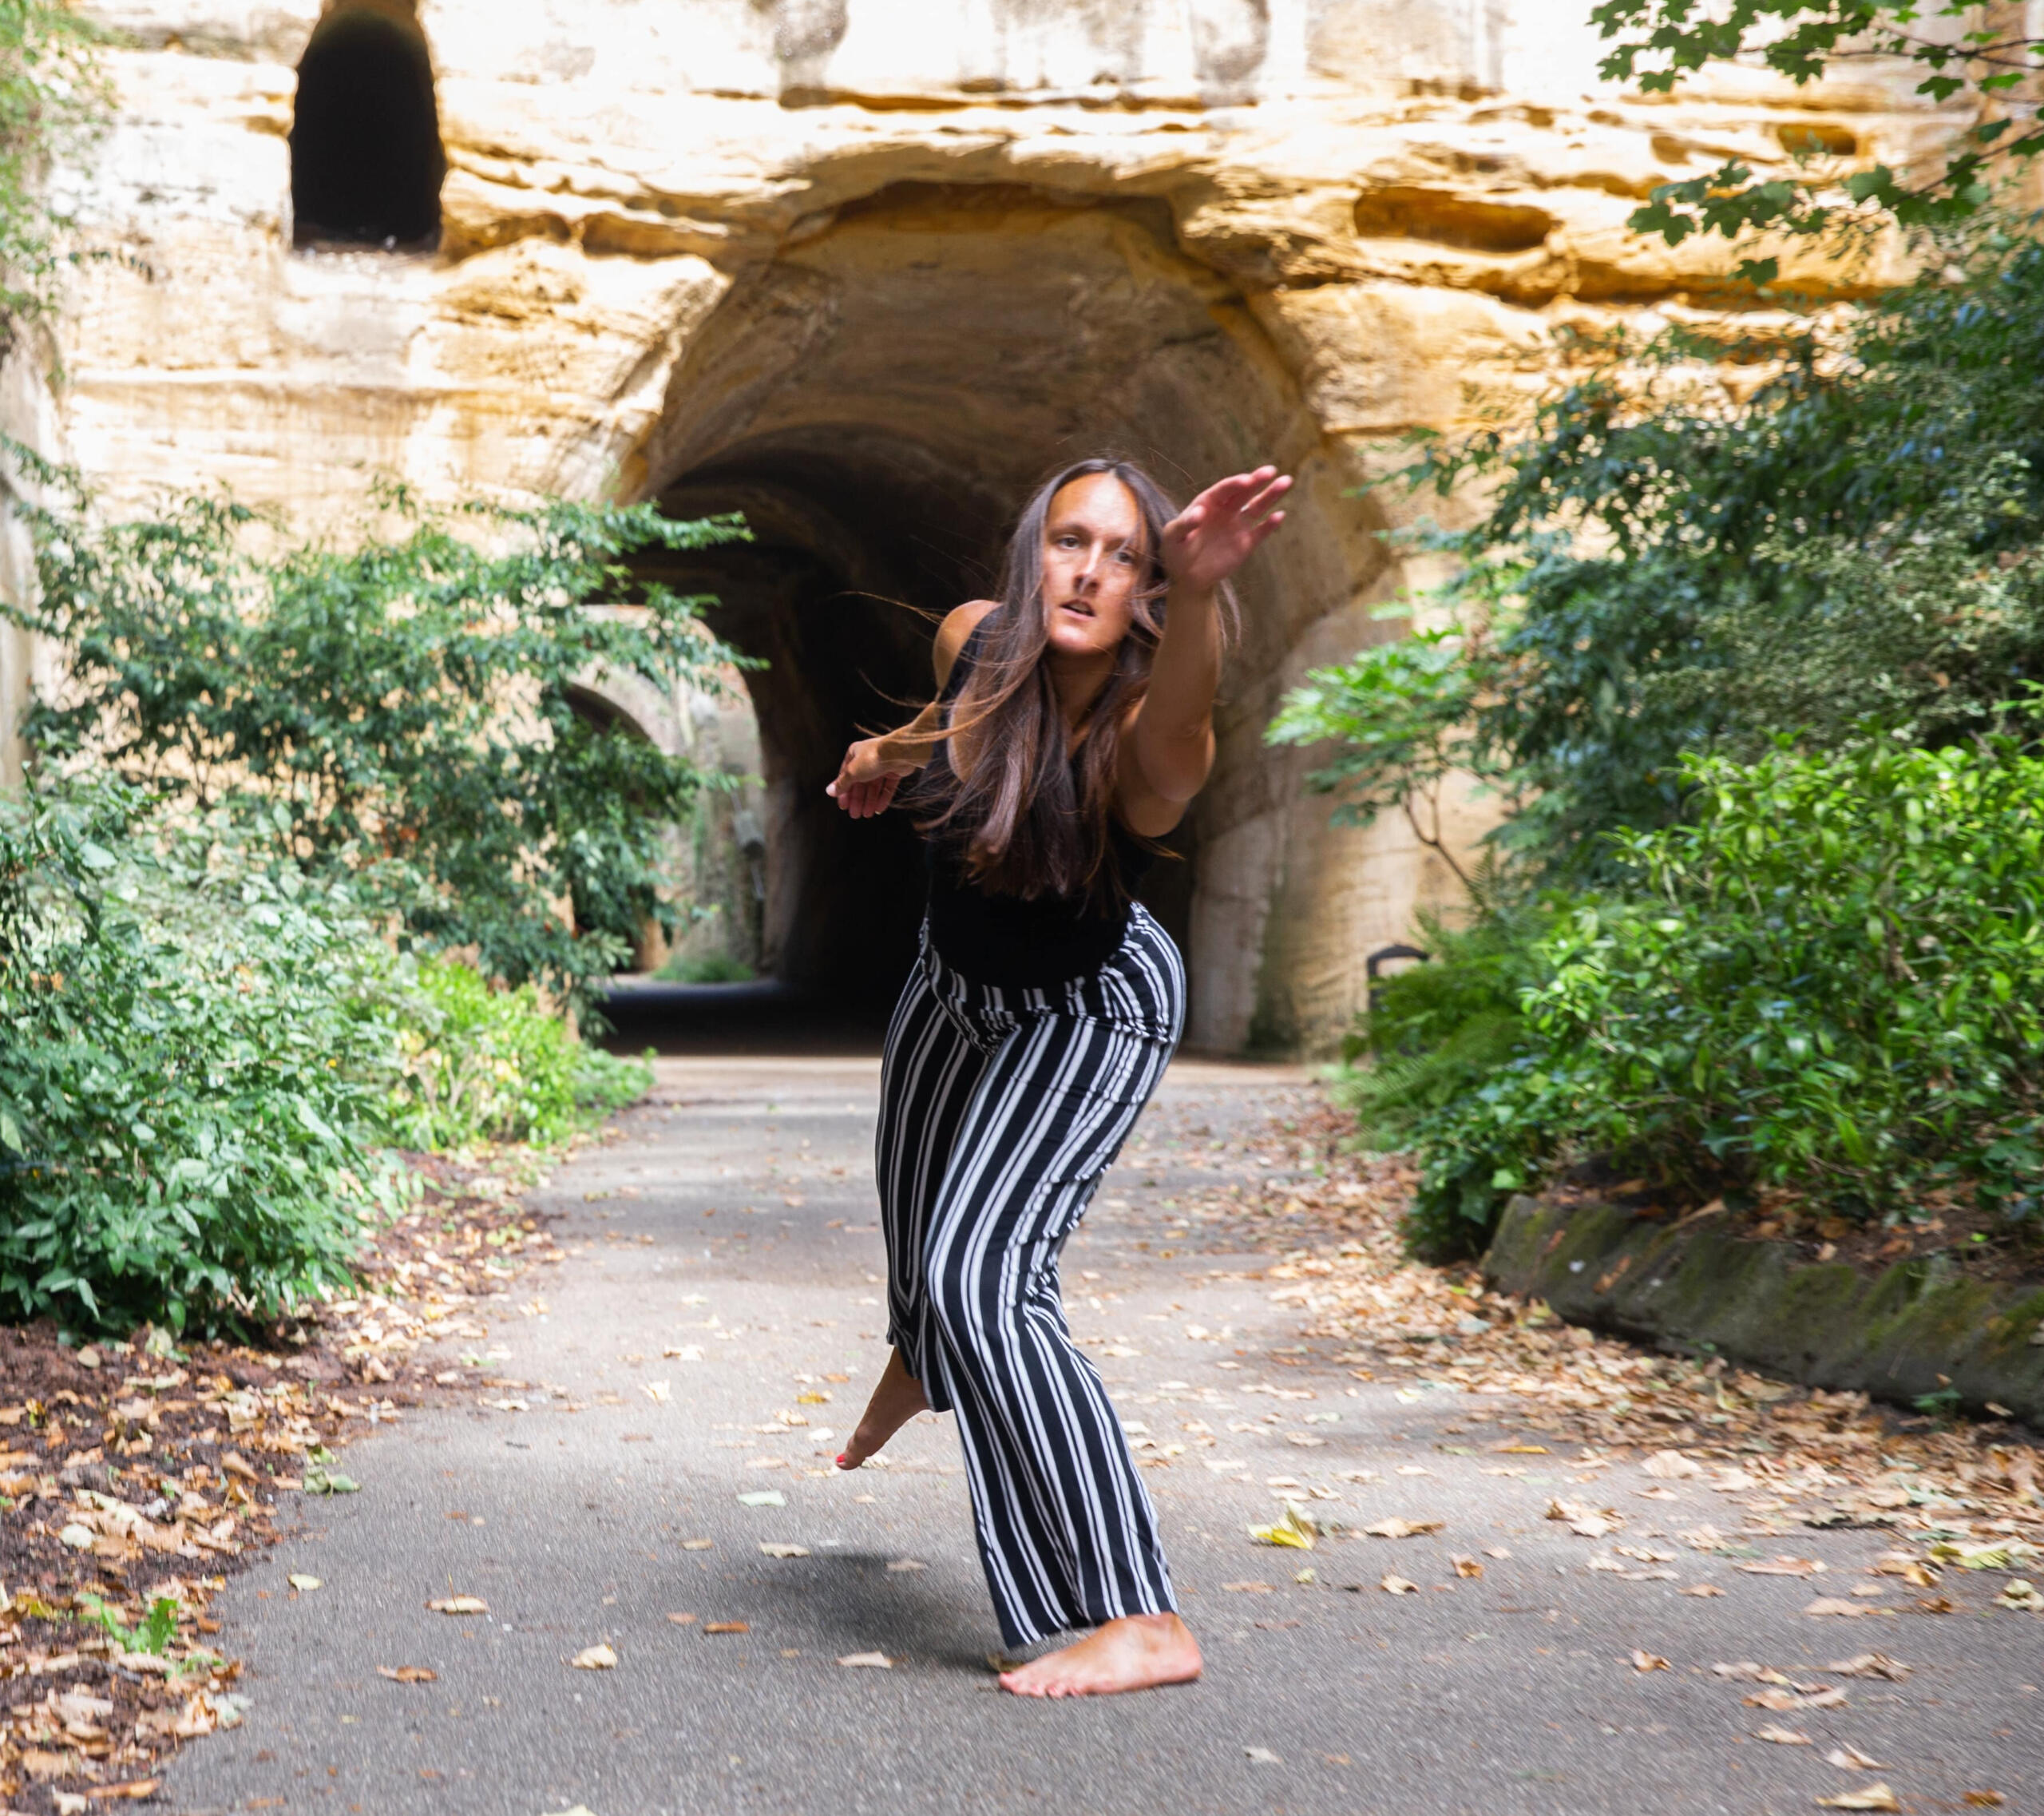 A dancer leaning sideways towards the camera outside in front of the entrance to a tunnel